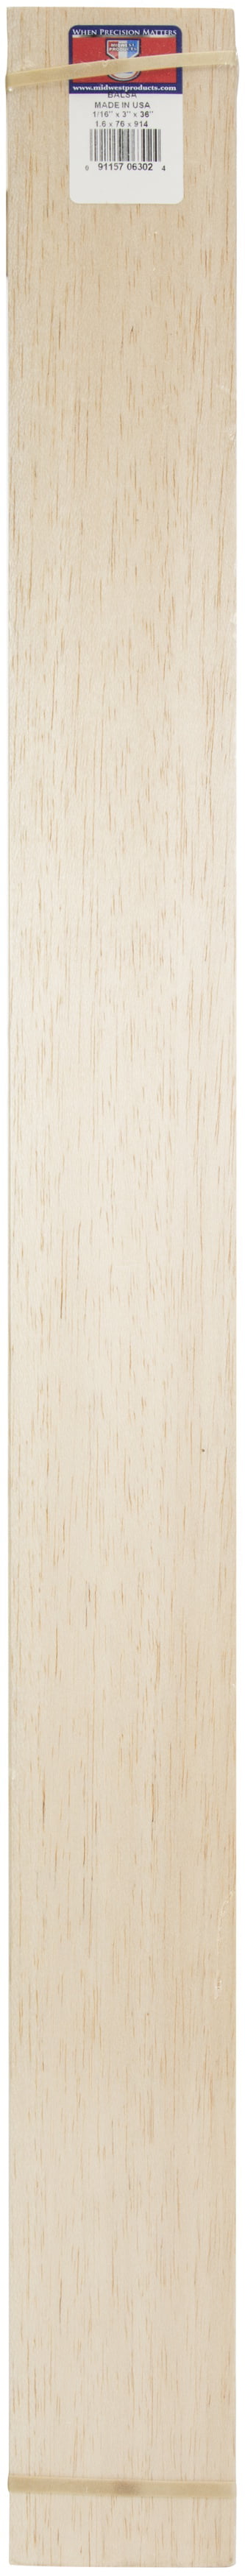 Midwest Products 6303 Balsa Wood 3/32 x 3 x 36 inch - Quantity of 10 Pieces